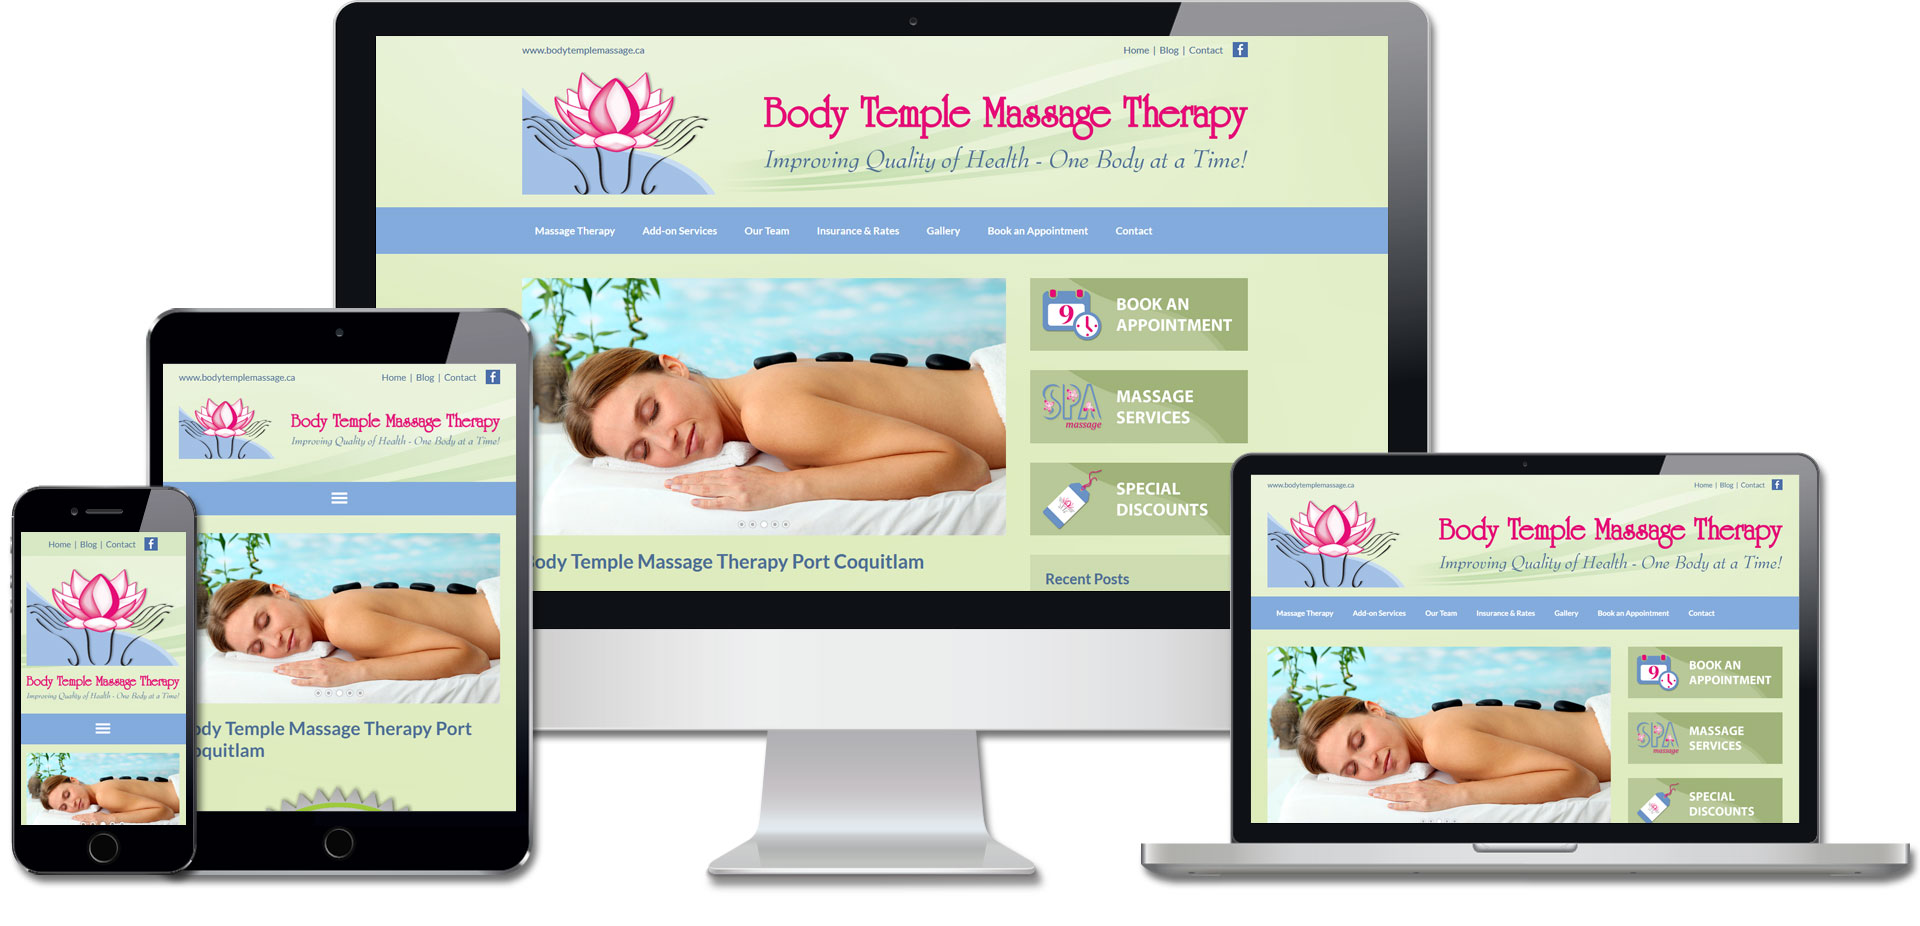 Body Temple Massage Therapy Website